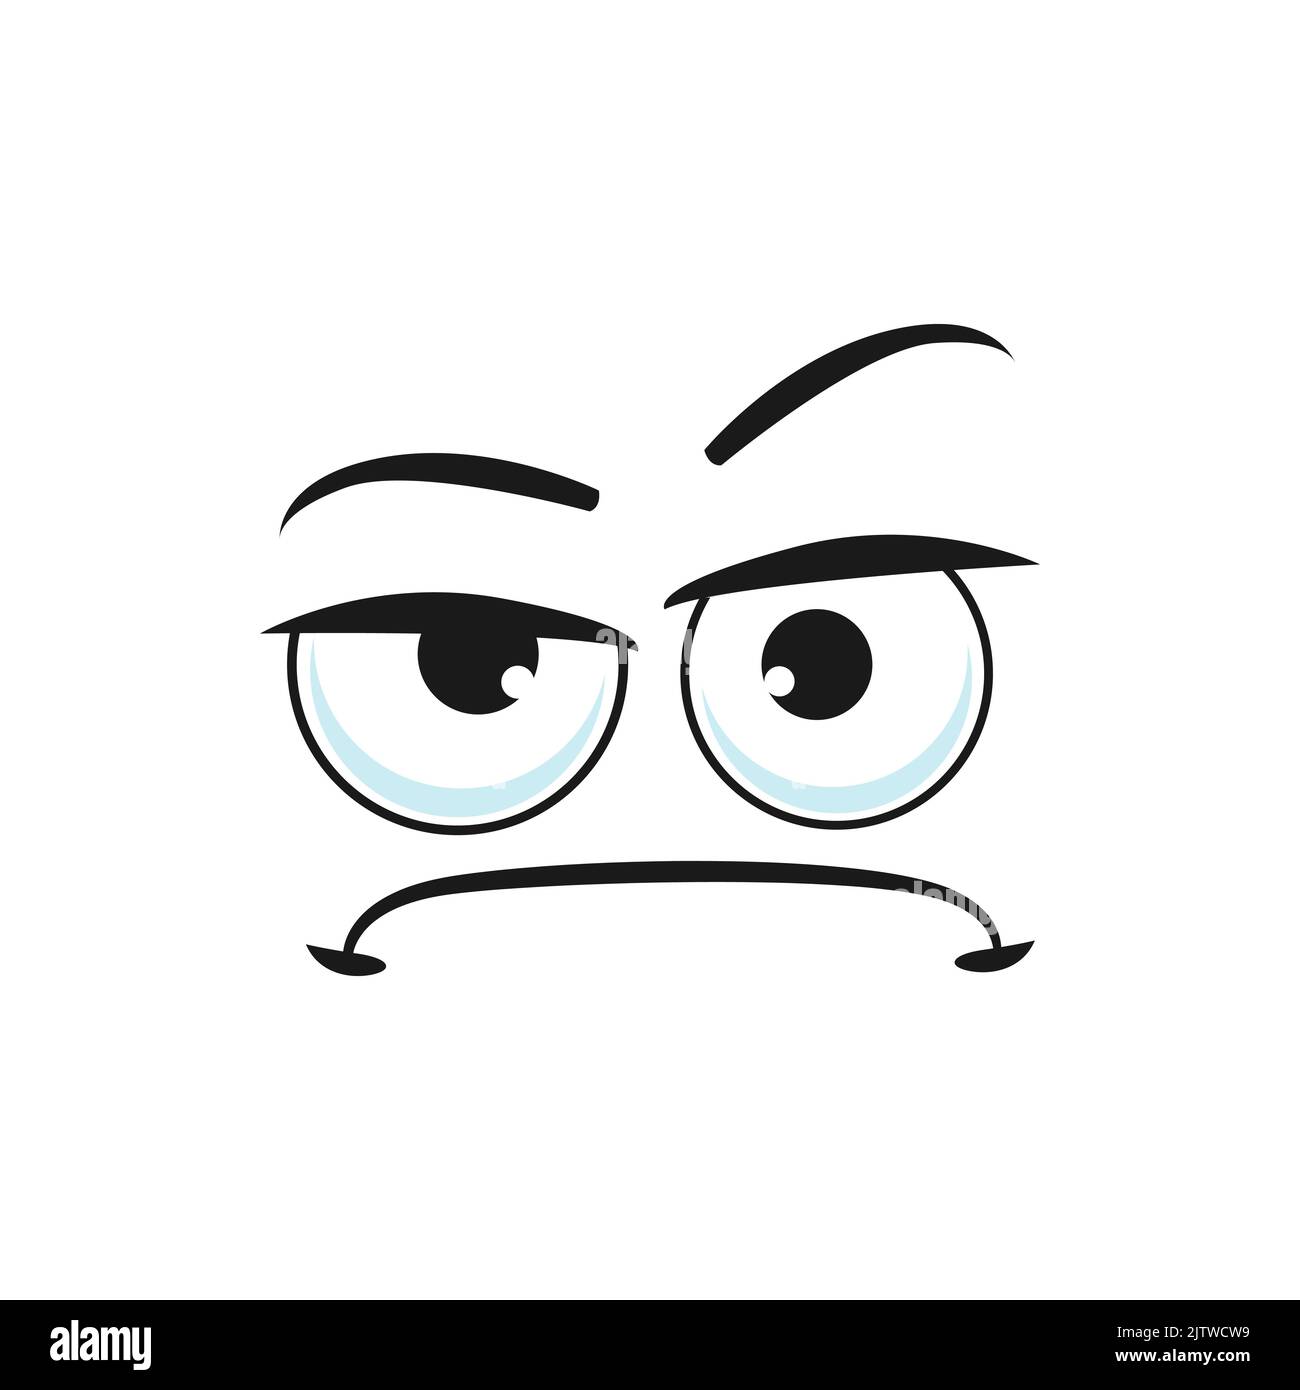 Cartoon face vector suspecting emoji with squinted eyes look sullenly and closed mouth with corners curved down. Doubt facial expression, suspect funny feelings isolated on white background Stock Vector